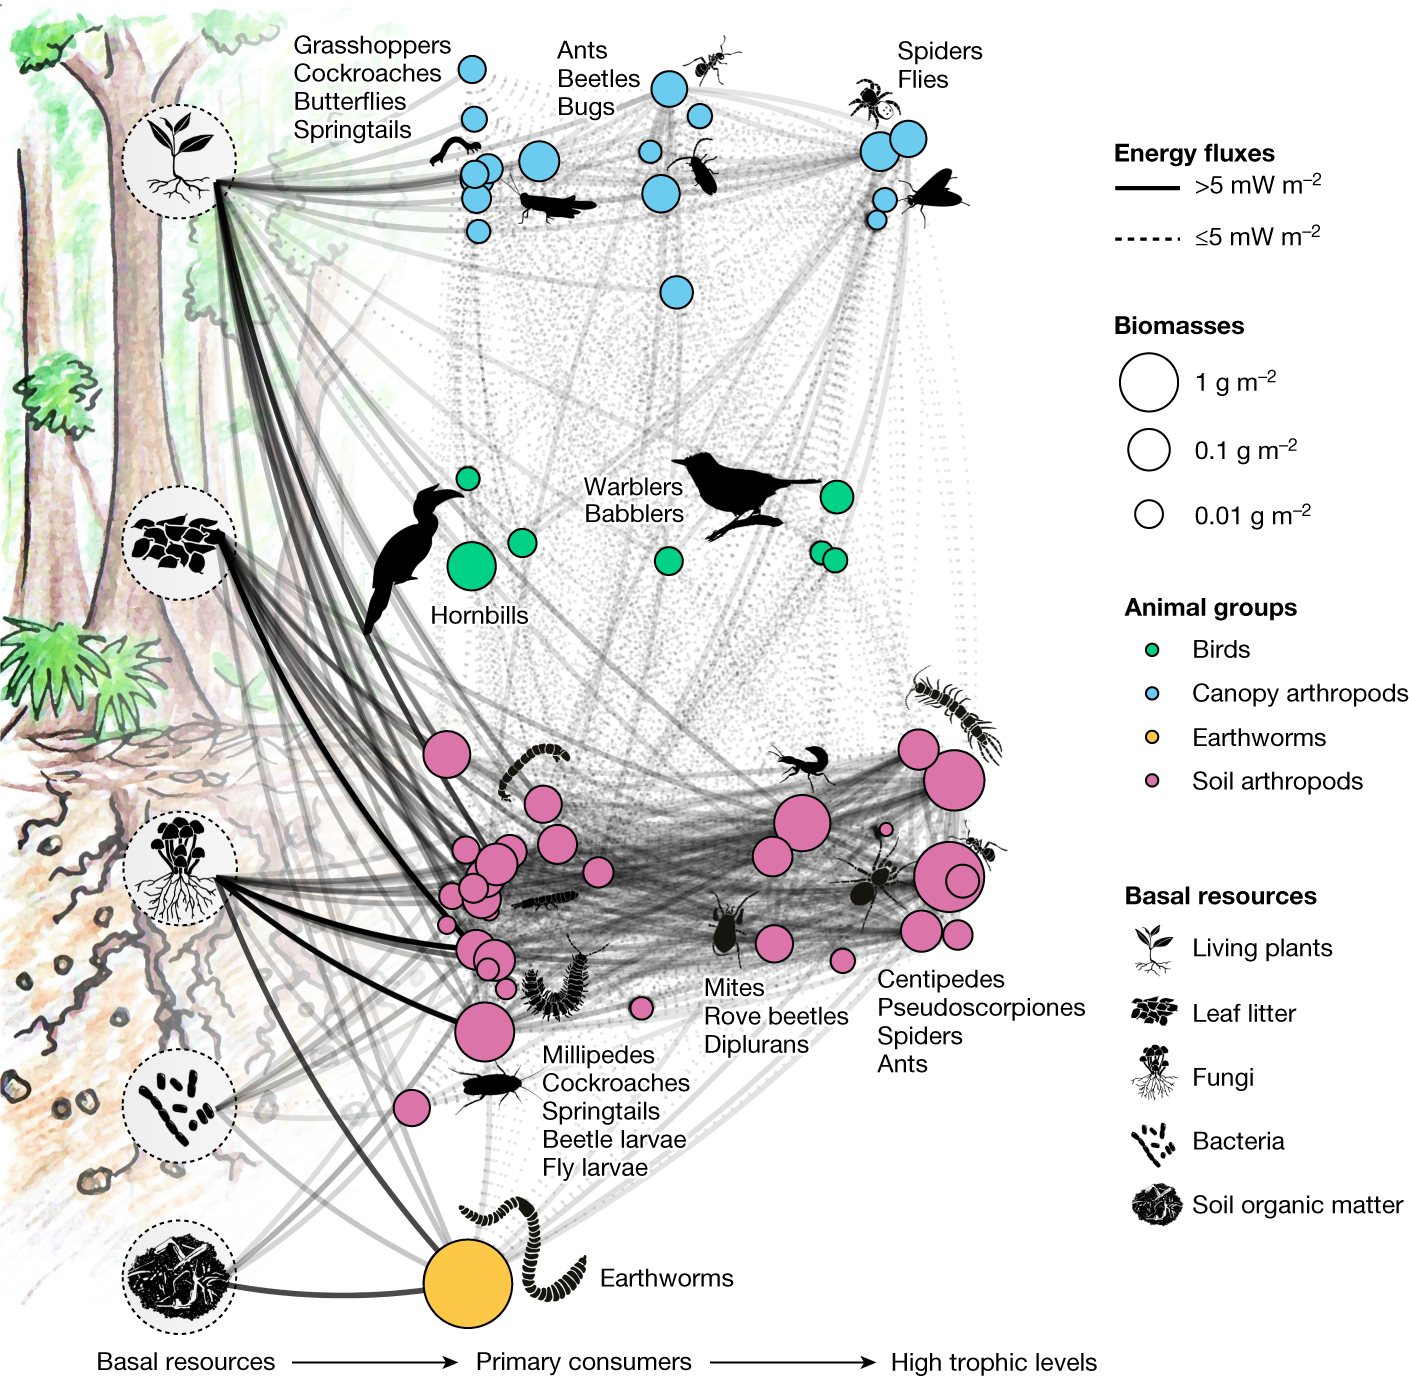 Rainforest transformation reallocates energy from green to brown food webs